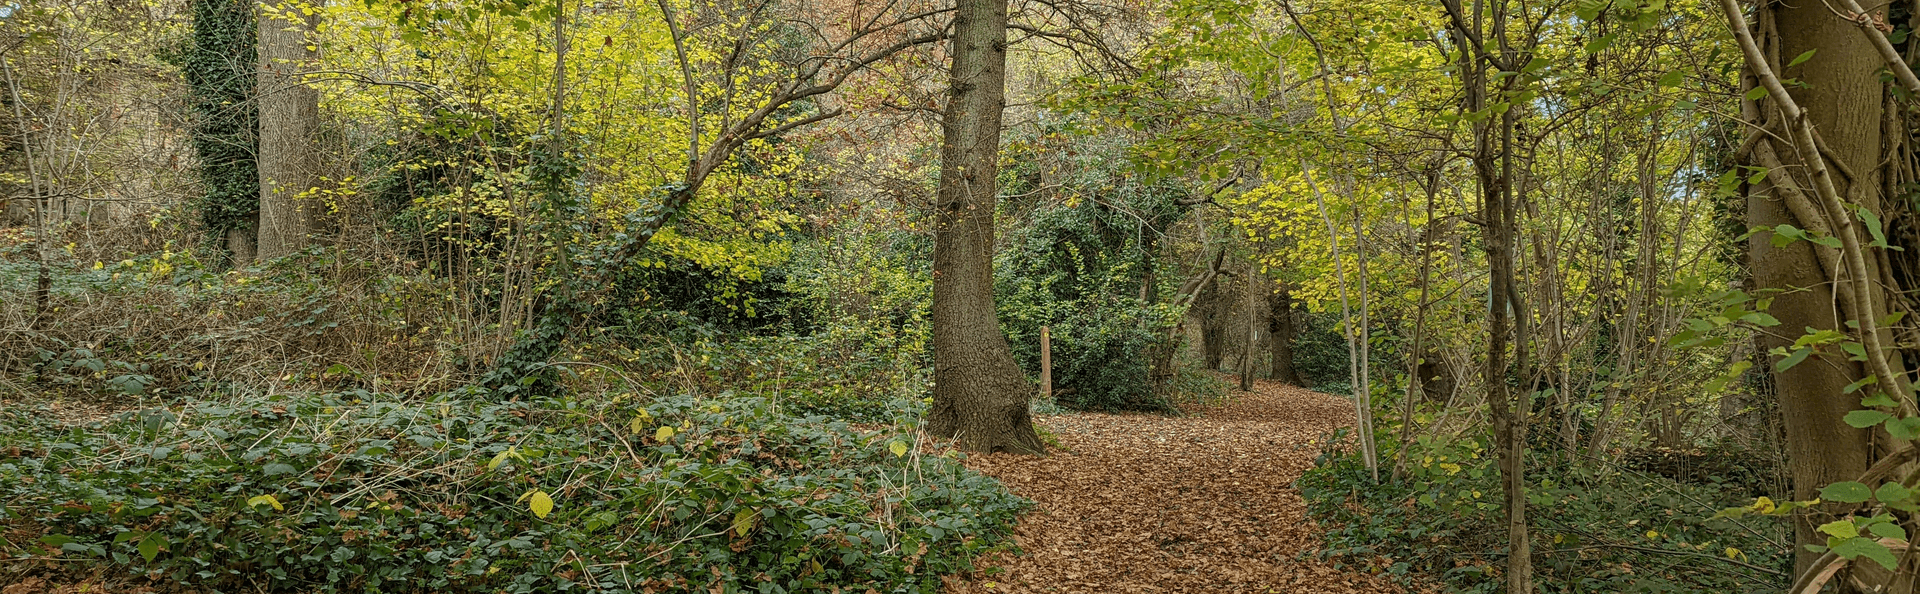 tree canopy in Foxley woods